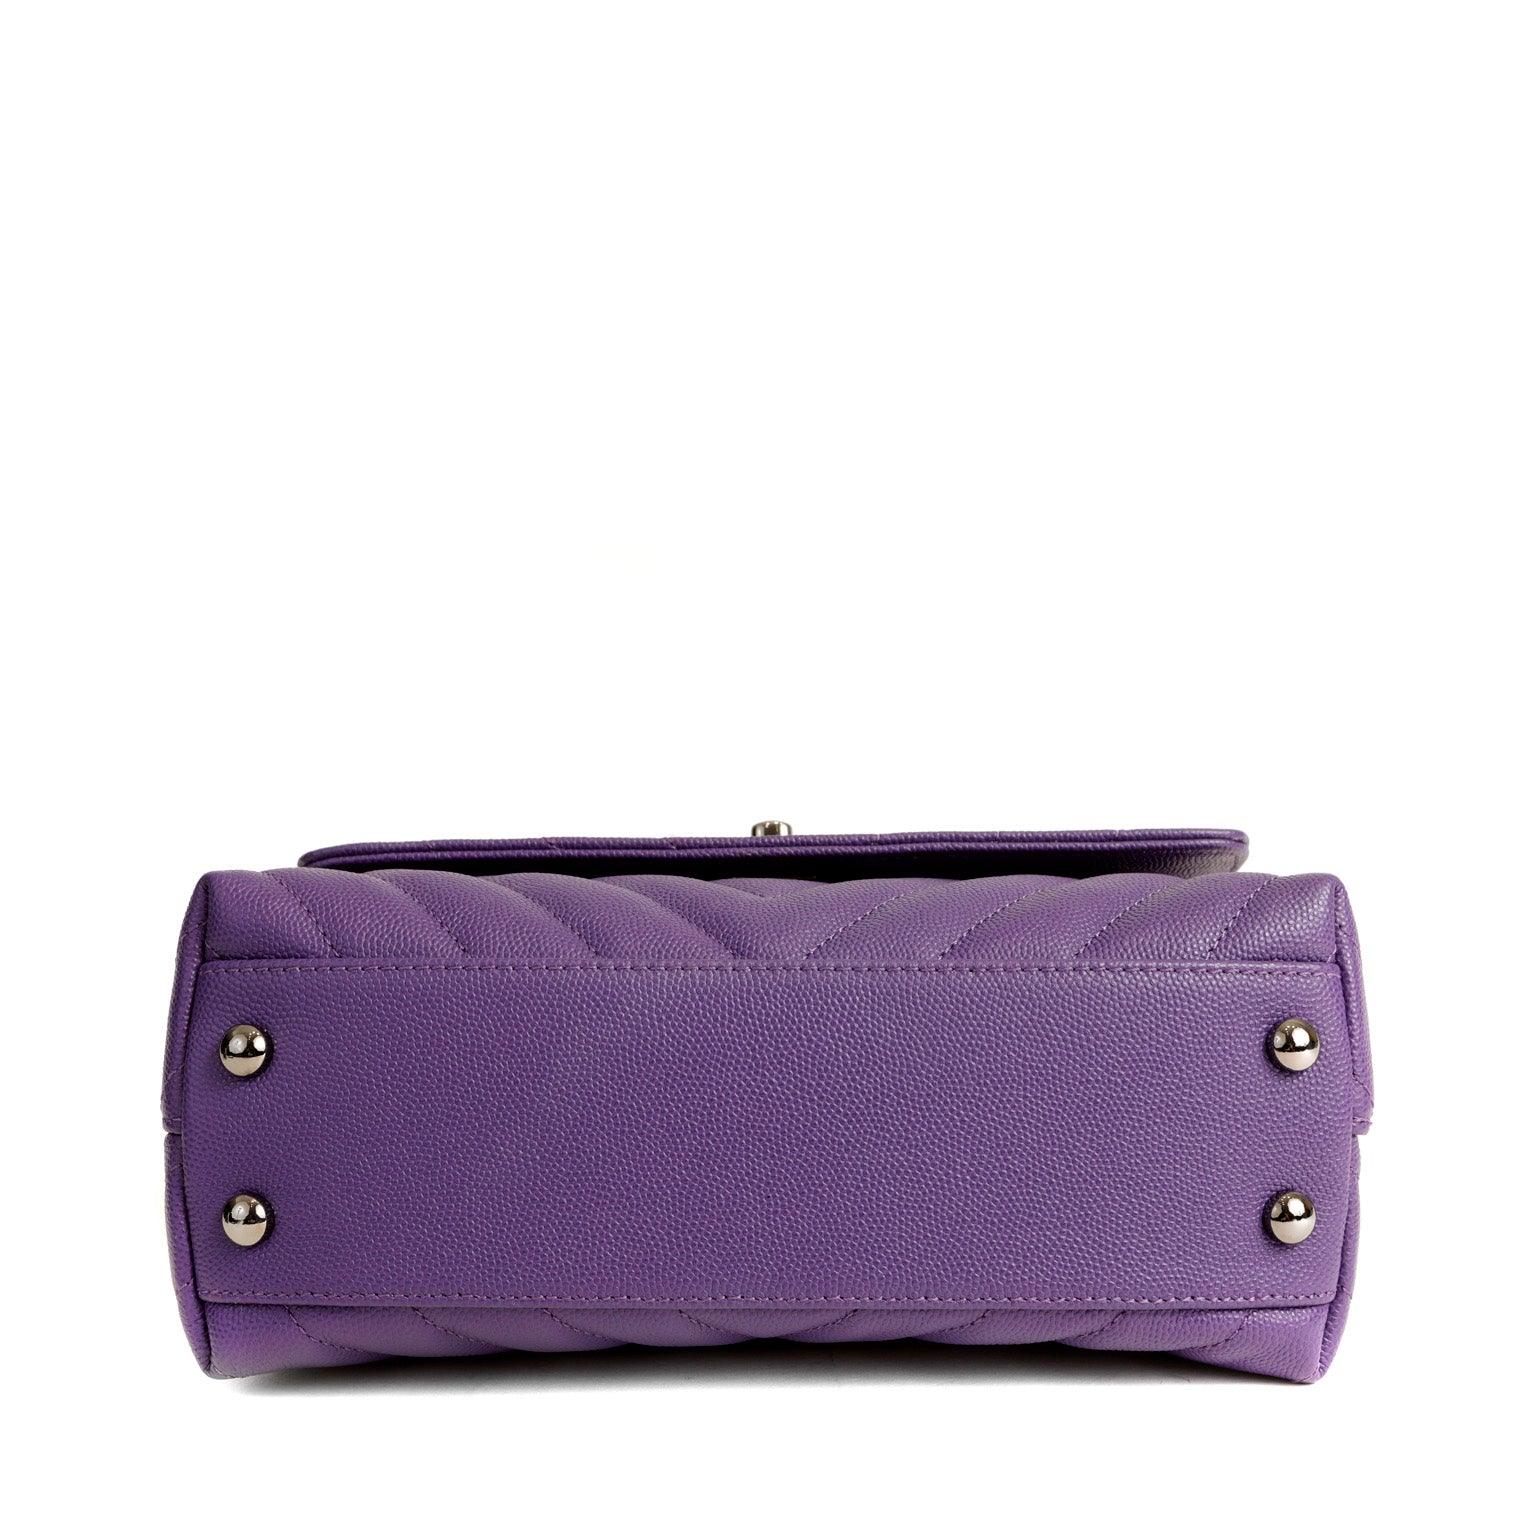 Get your hands on the stylish and chic Chanel Purple Caviar